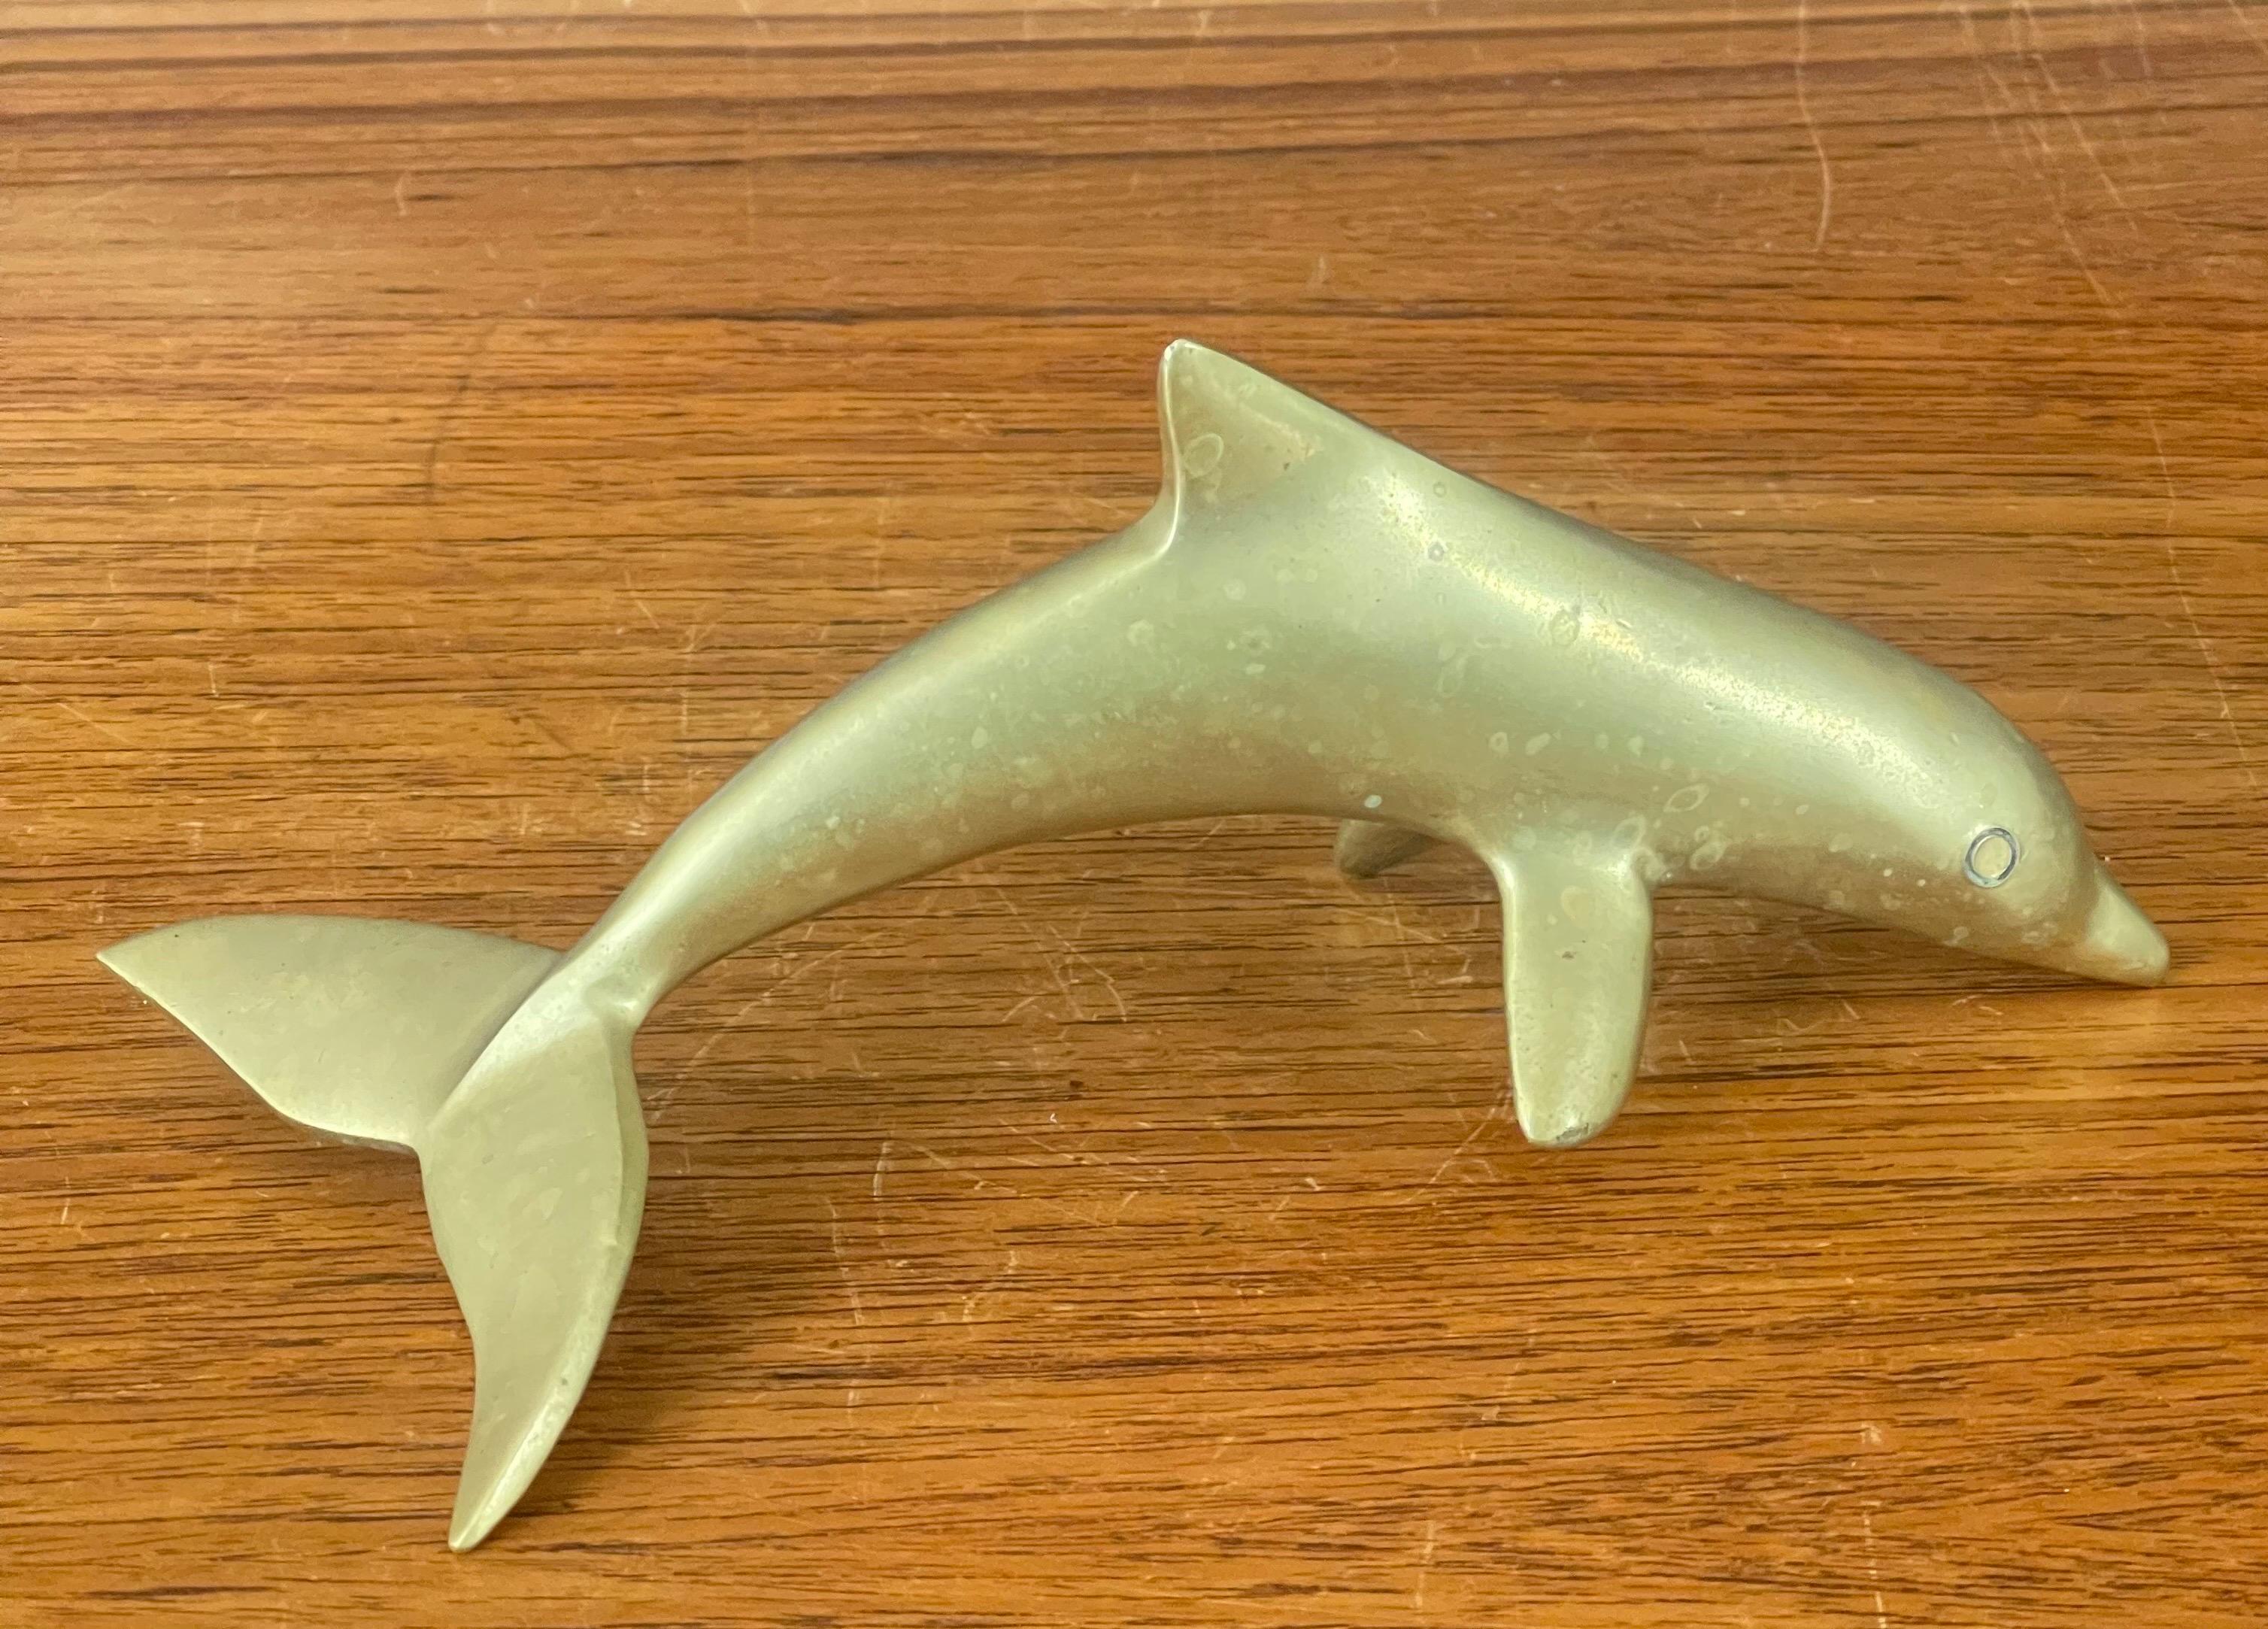 A very nice mid-century brass dolphin sculpture/ paperweight, circa 1970s. The piece is in very good vintage condition with a nice patina and measures 7.5